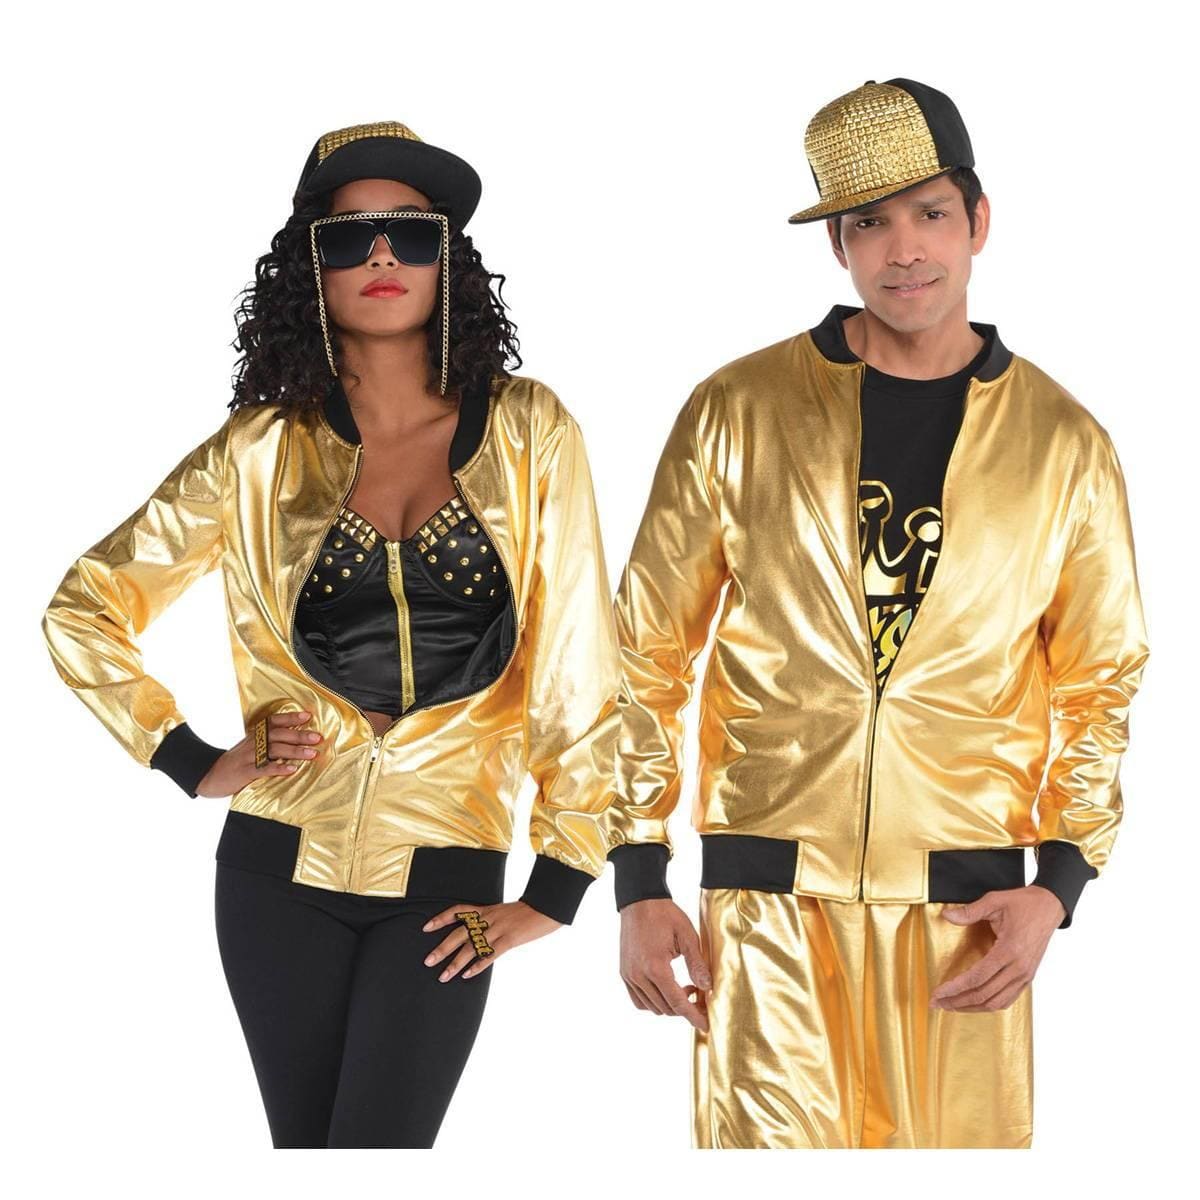 Buy Costume Accessories Hip hop jacket for adults sold at Party Expert